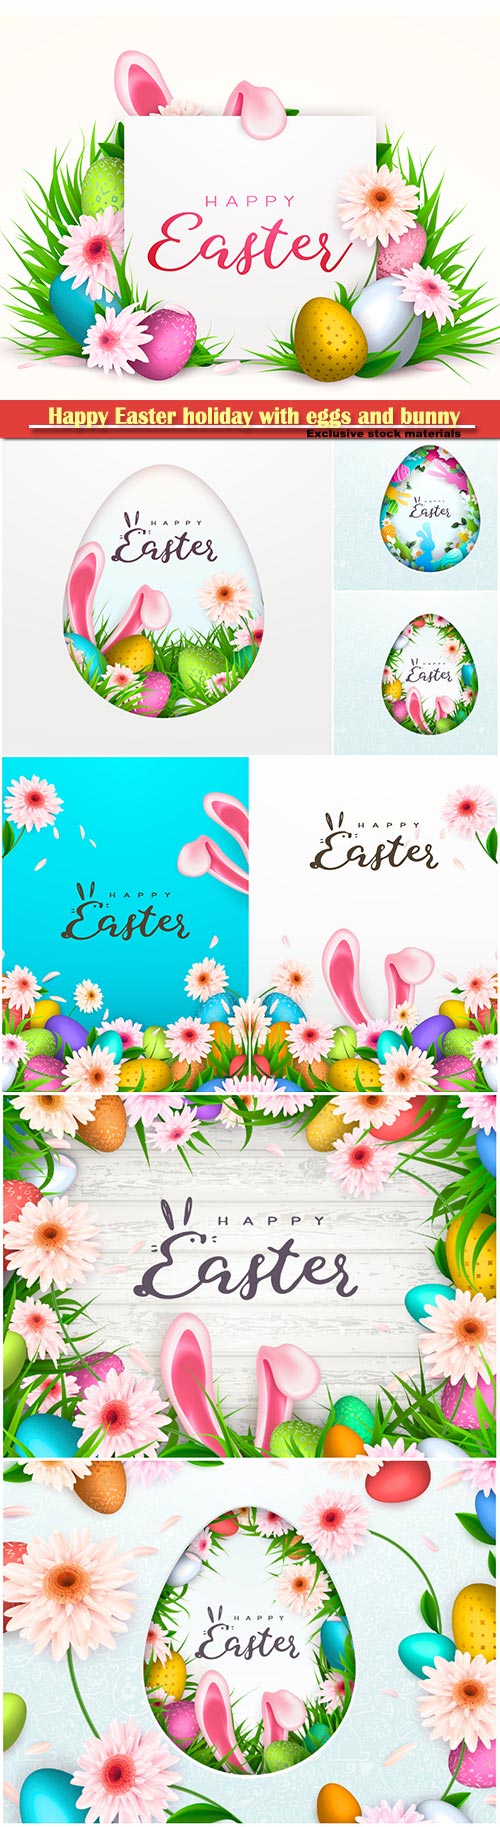 Happy Easter holiday with eggs and bunny, vector illustration # 5